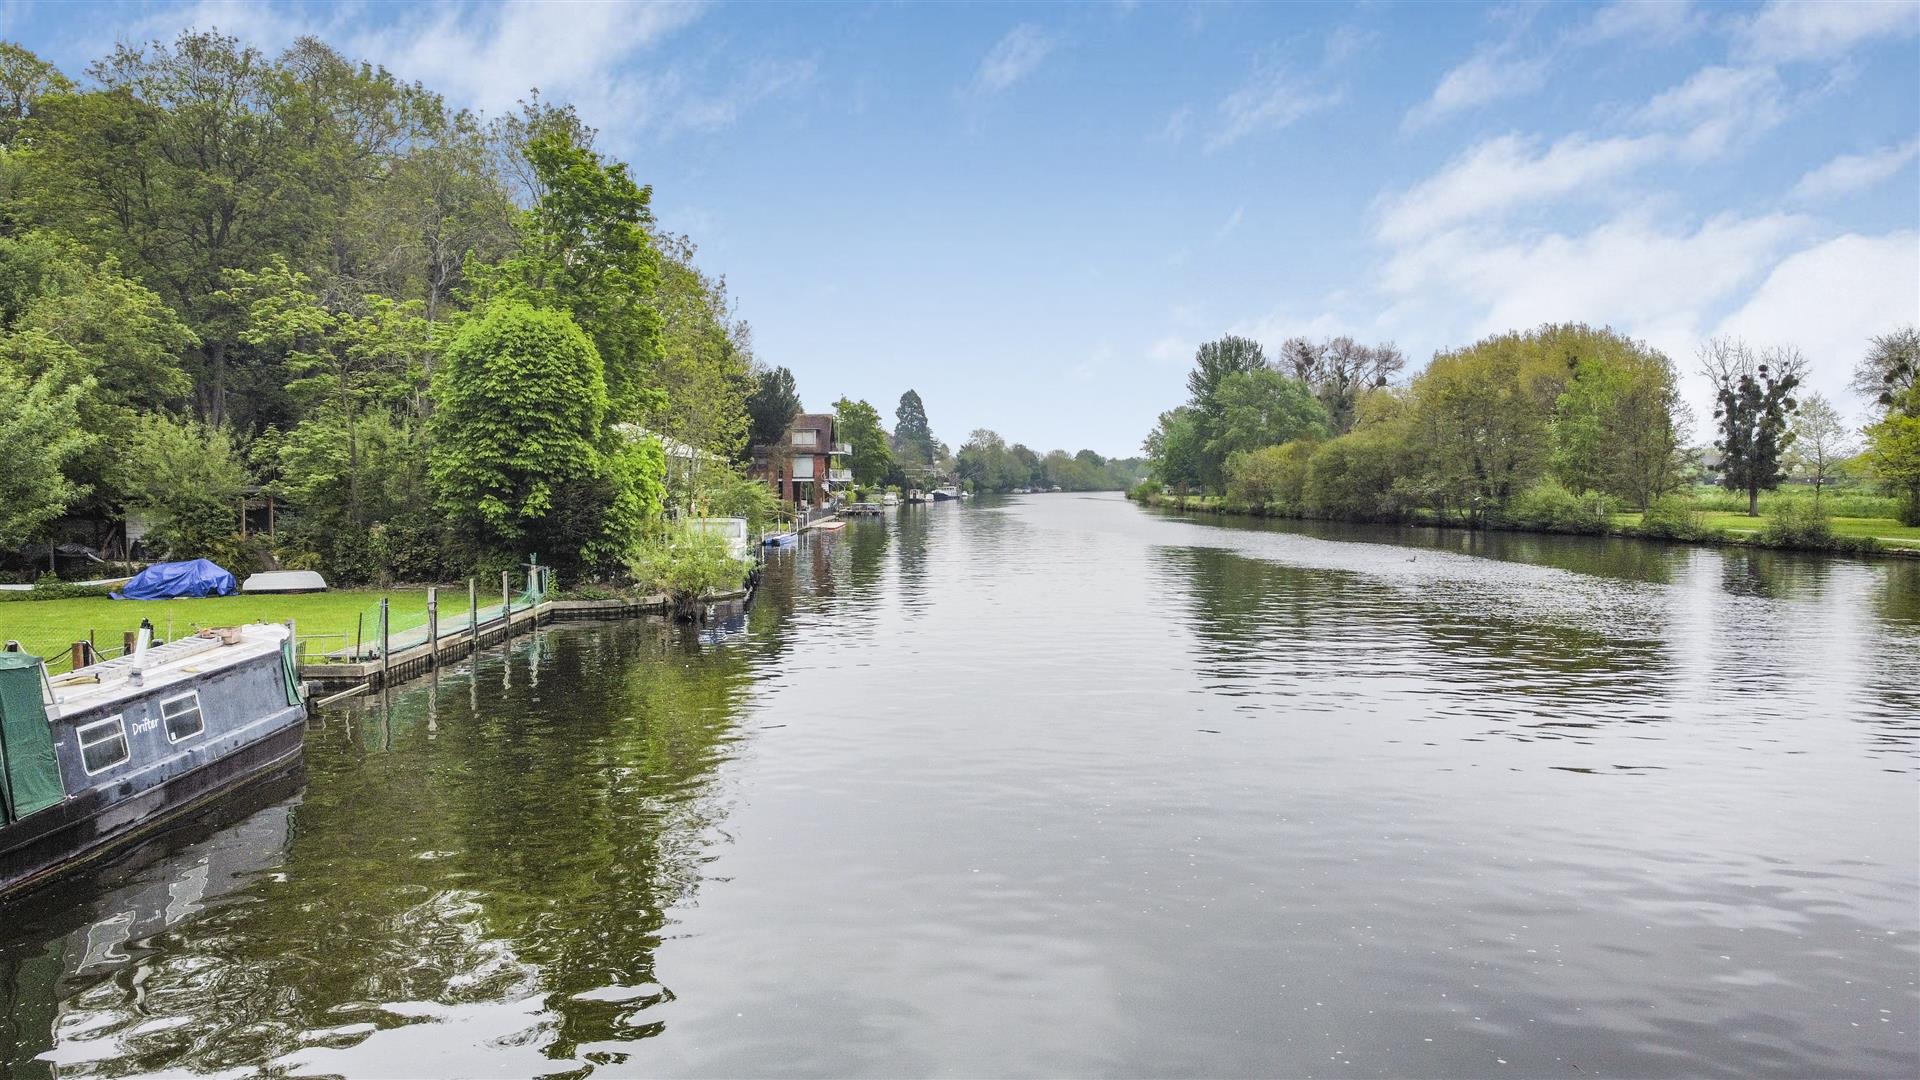 The Warren Caversham house for sale in Reading